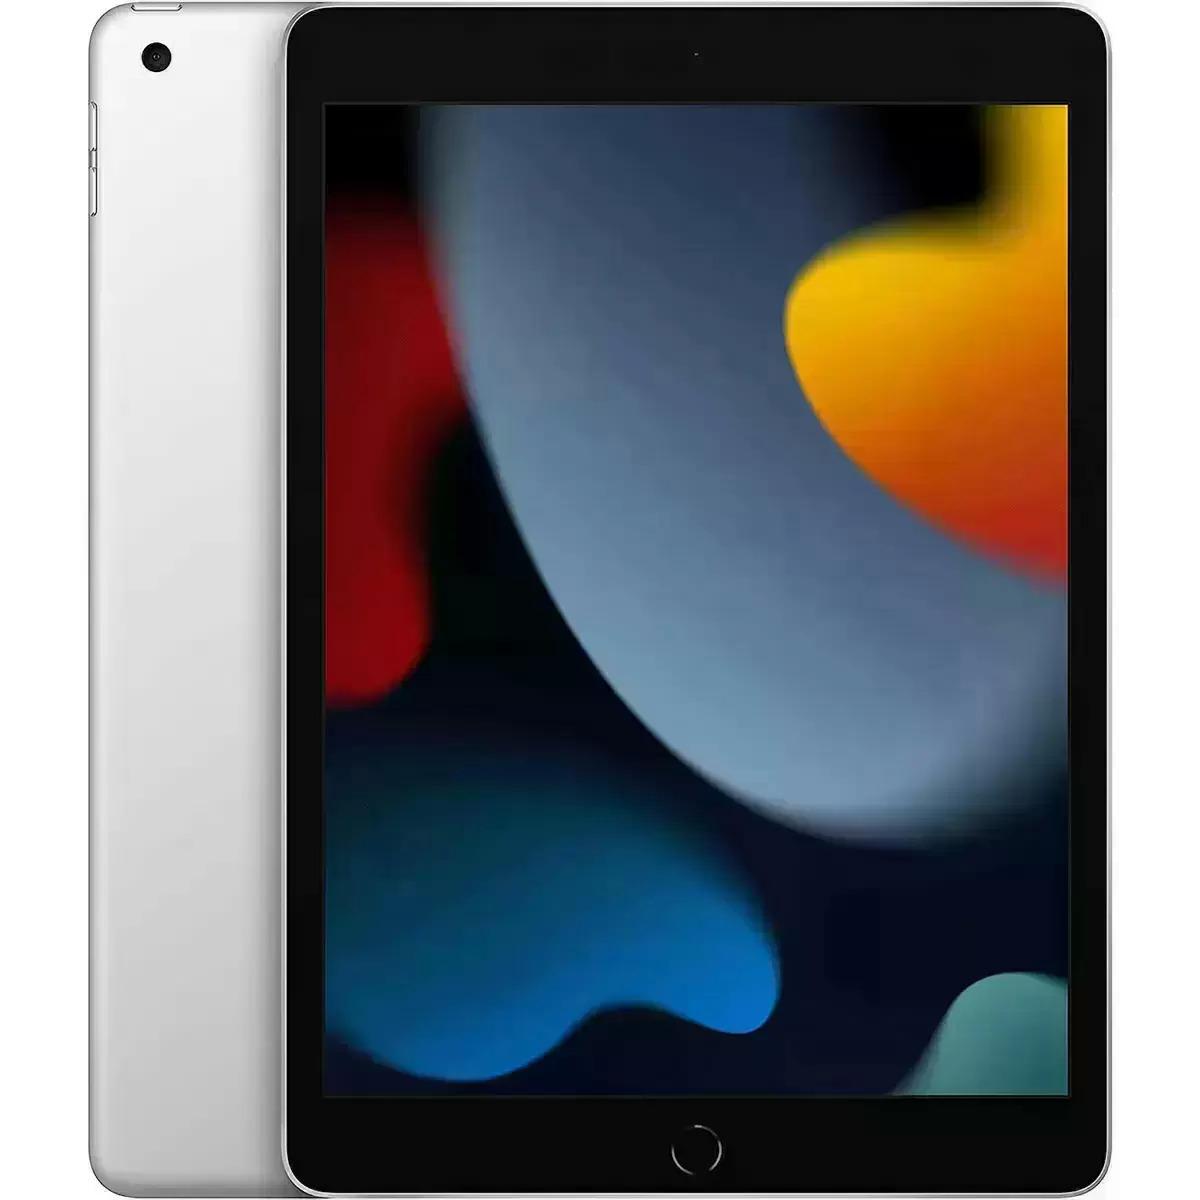 Apple iPad 9th Gen 64GB Wifi Tablet for $249.99 Shipped